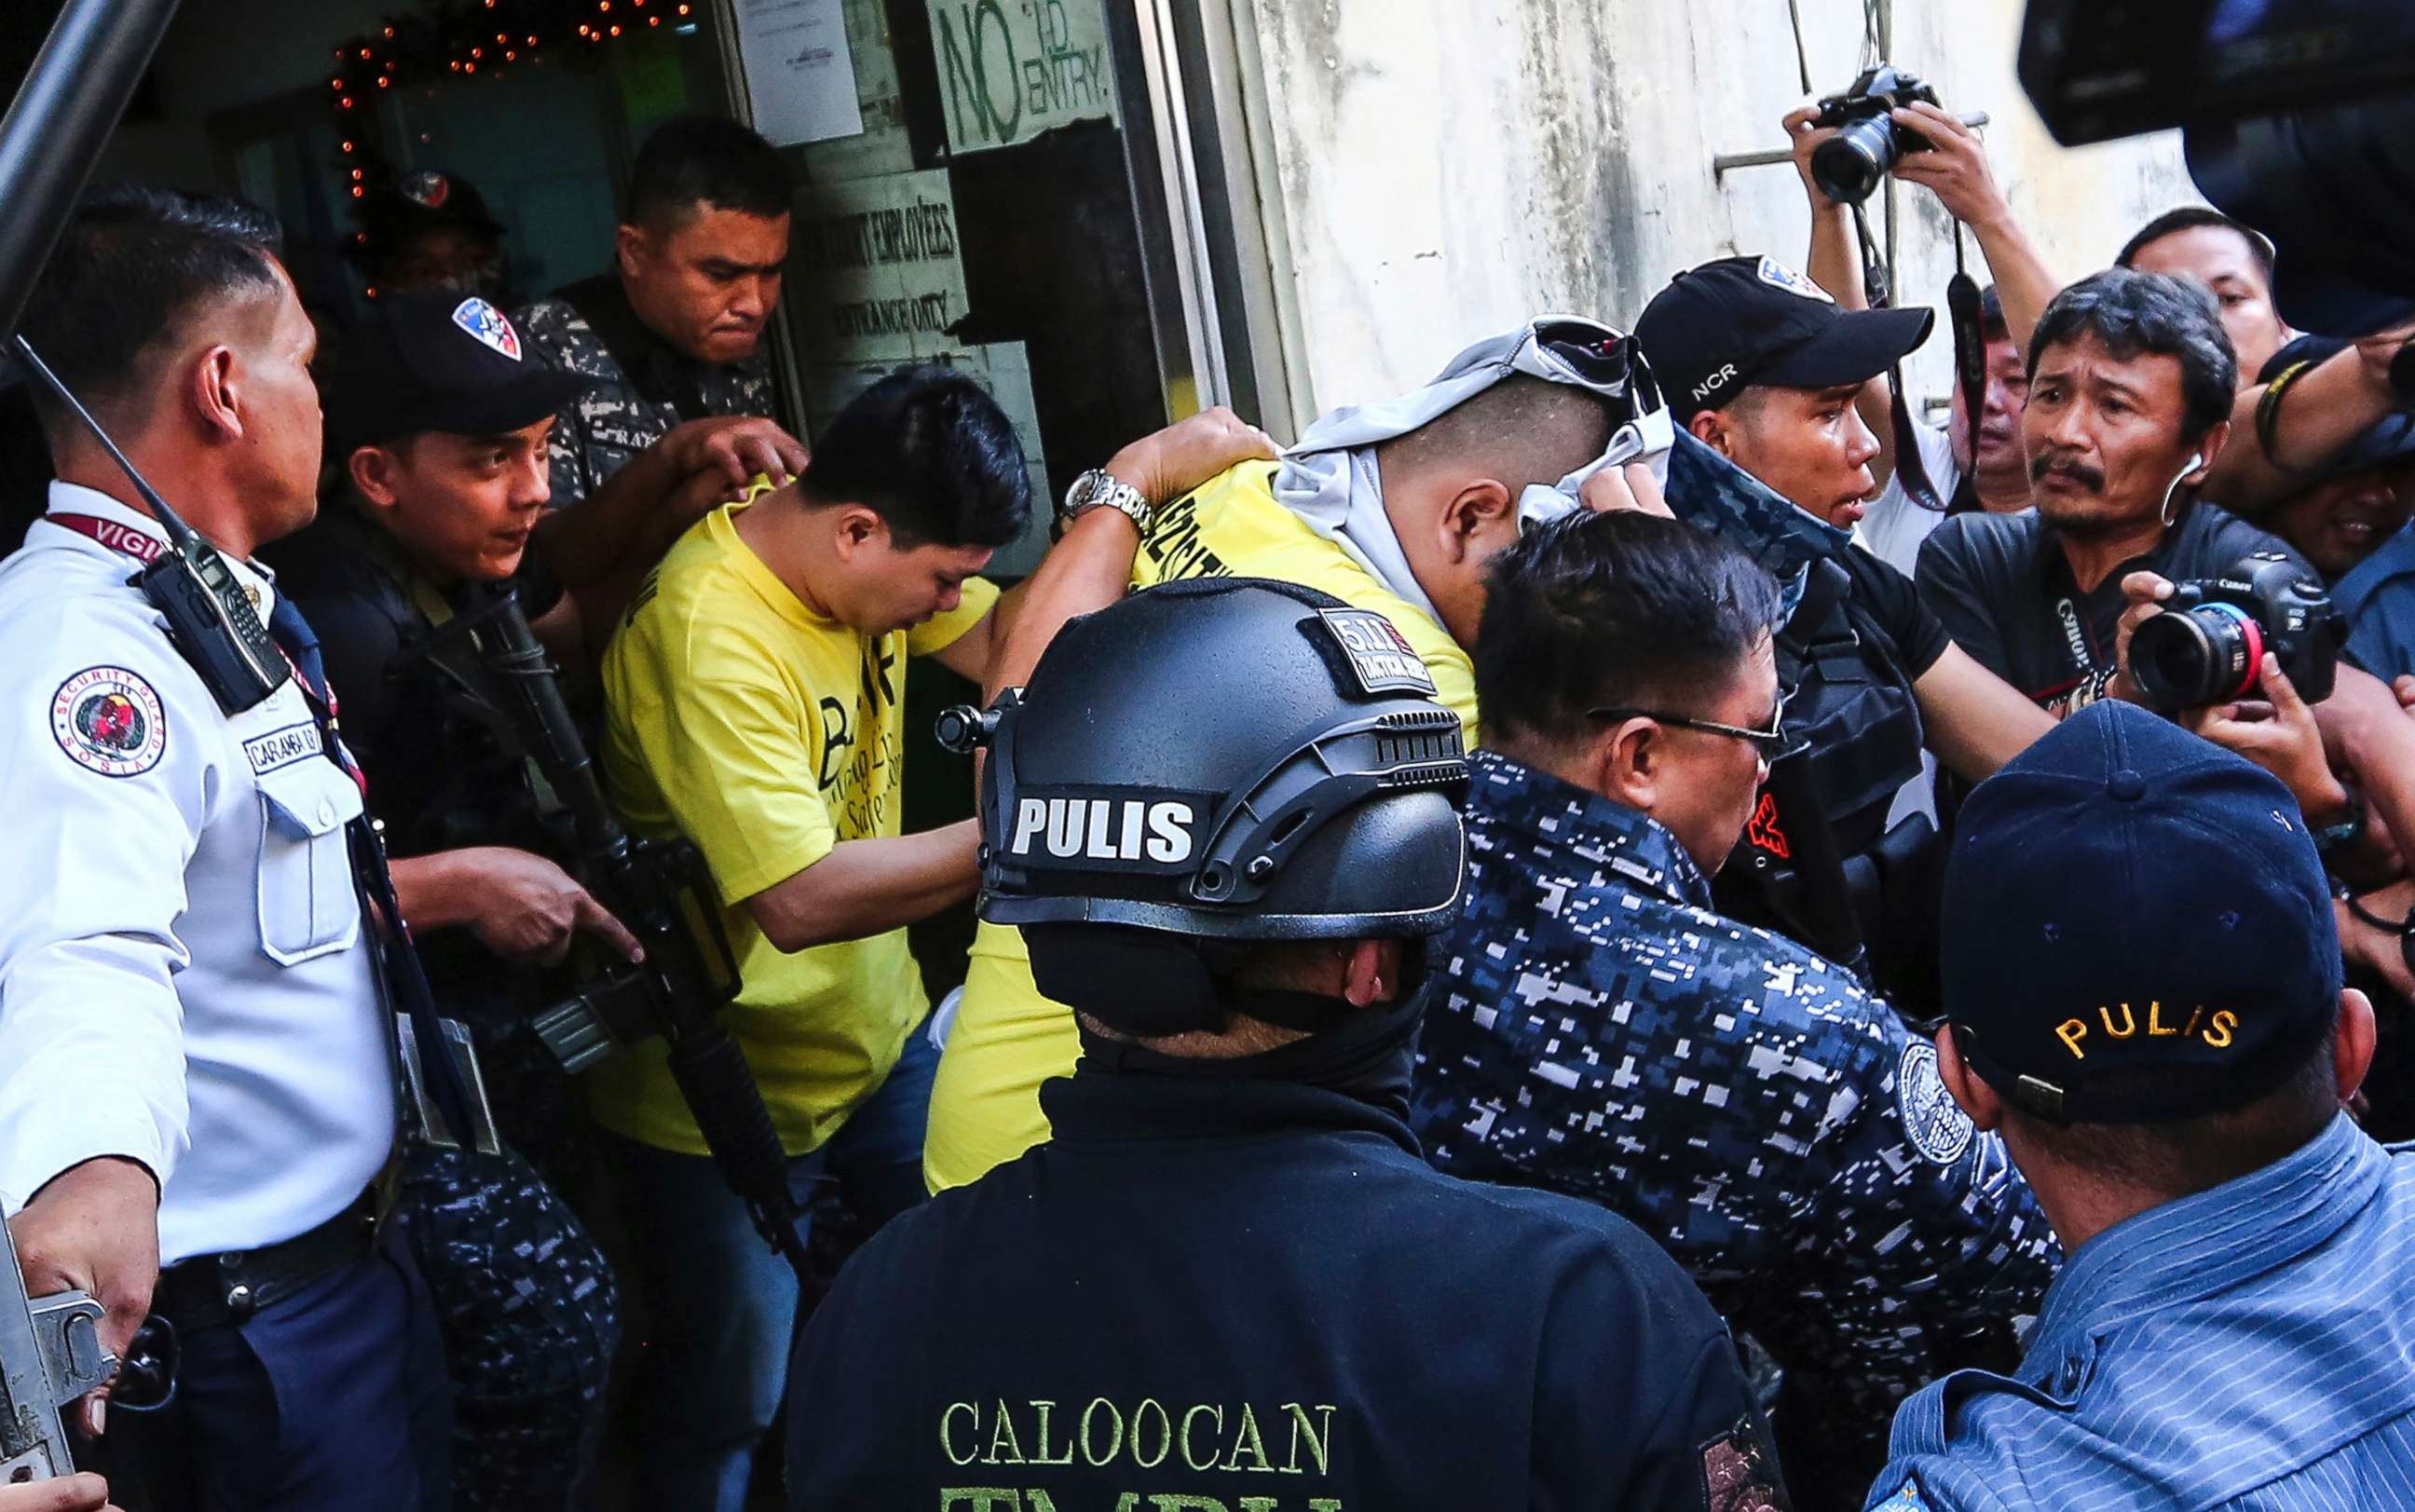 PHOTO: Two of three police officers are escorted out of the courtroom after being found guilty and sentenced up to 40 years without parole for the killing of a student, Nov. 29, 2018, in Caloocan city, Philippines.